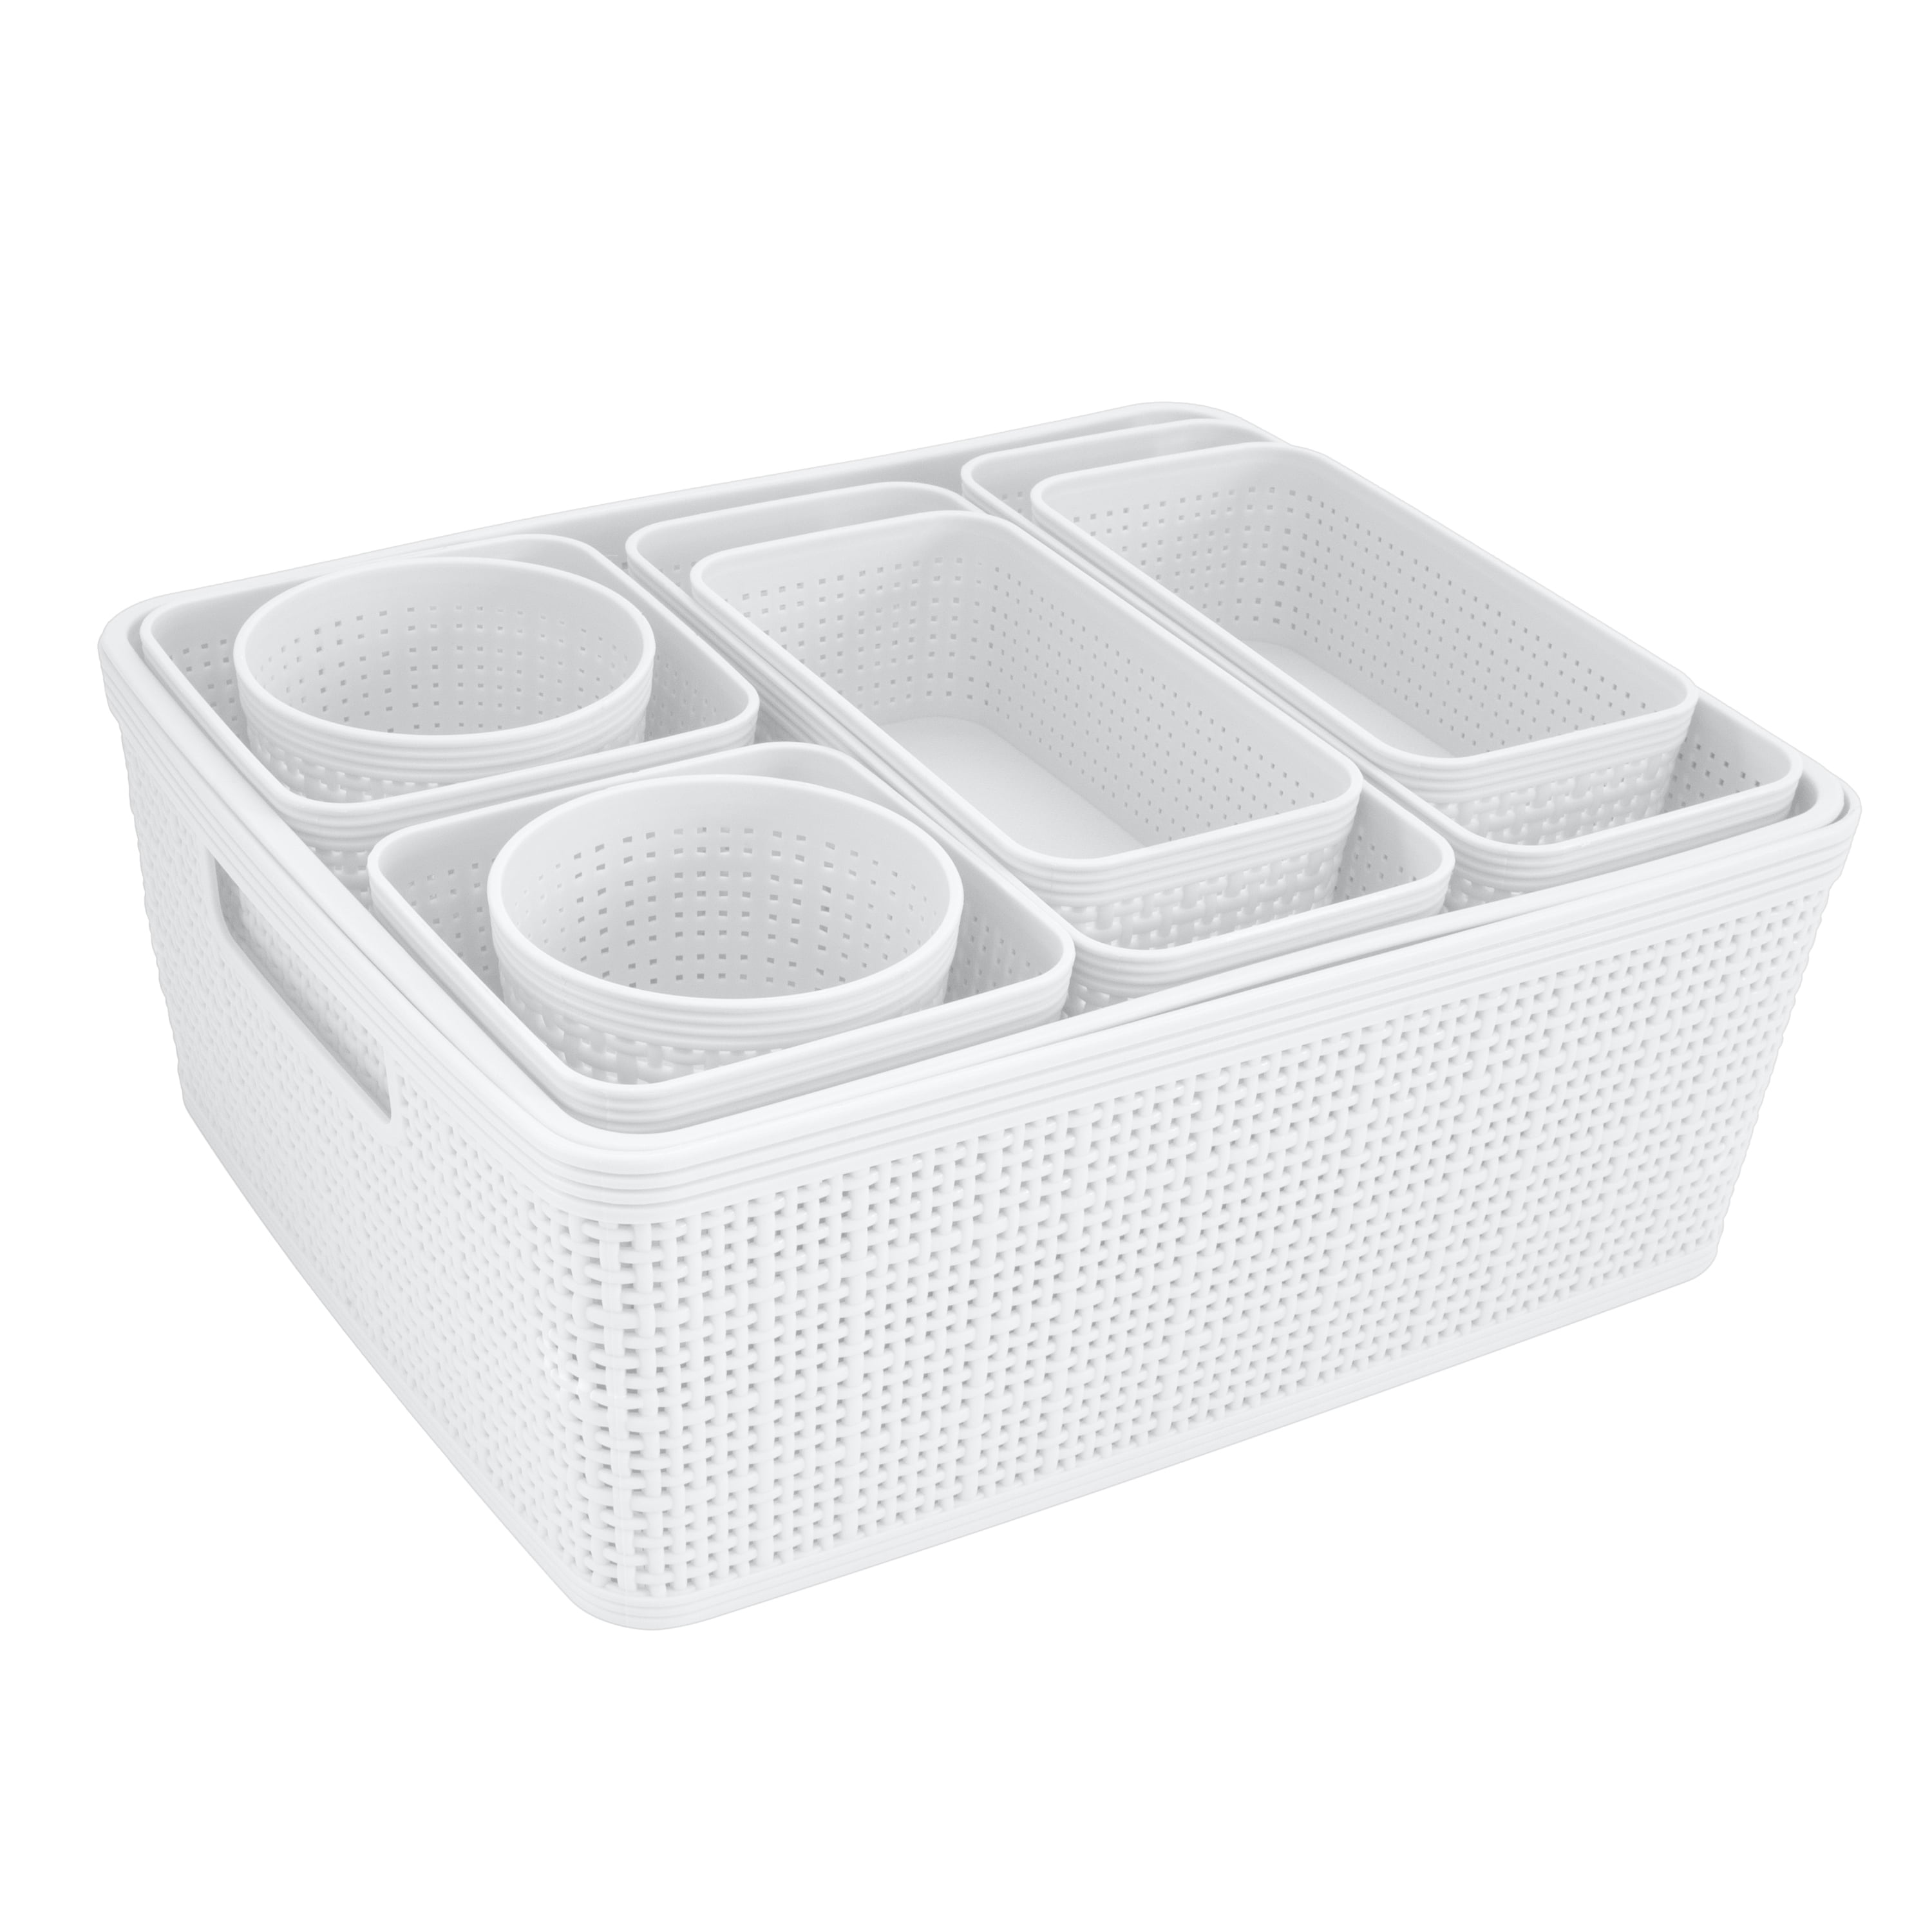 Decorative Plastic Open Home Storage Bins Organizer Baskets, White Smoke  (Set of 4) 1 Large, 1 Medium, 2 Small - Container Boxes for Organizing  Closet Shelves Drawer Shelf - Ribbed Collection 